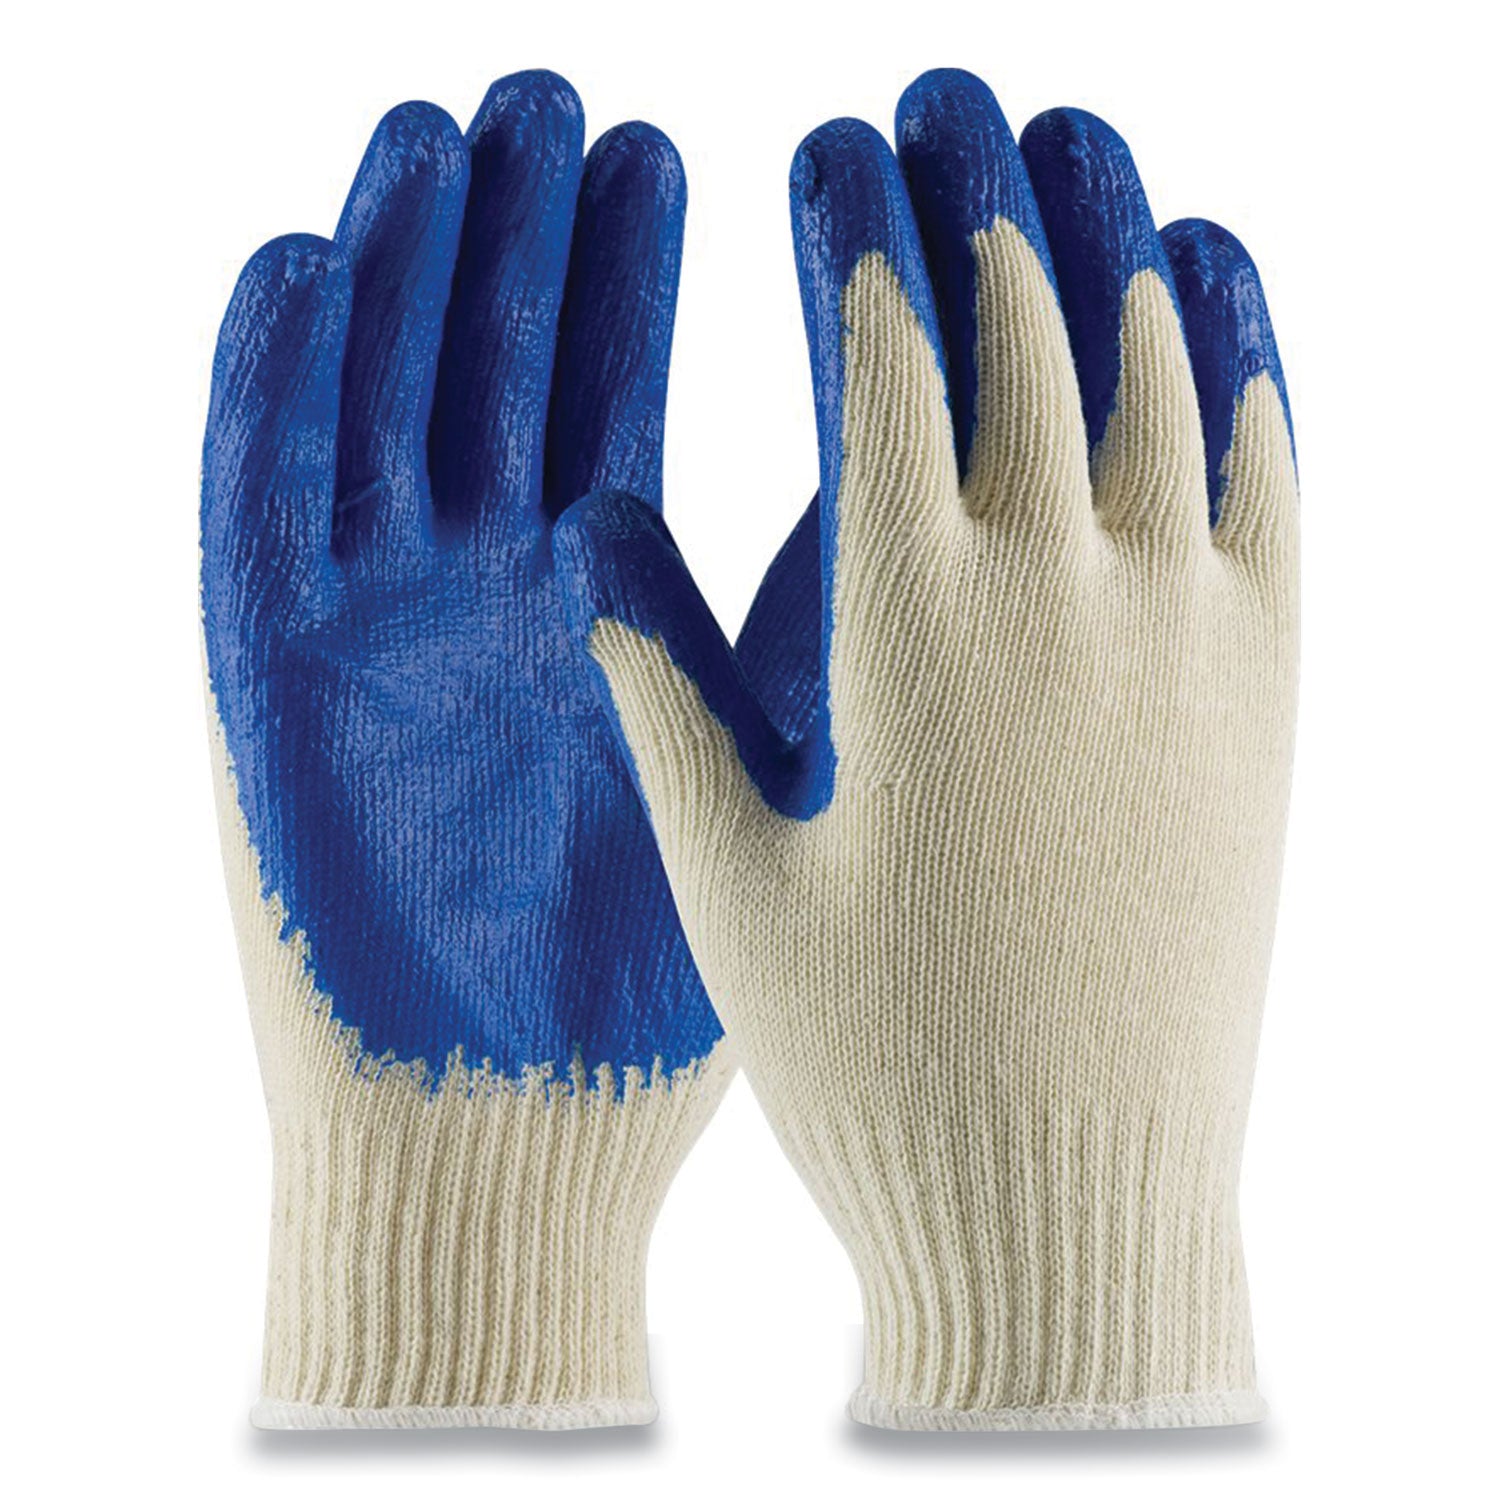 Seamless Knit Cotton-polyester Gloves, Regular Grade, Small, White-blue, 12 Pairs